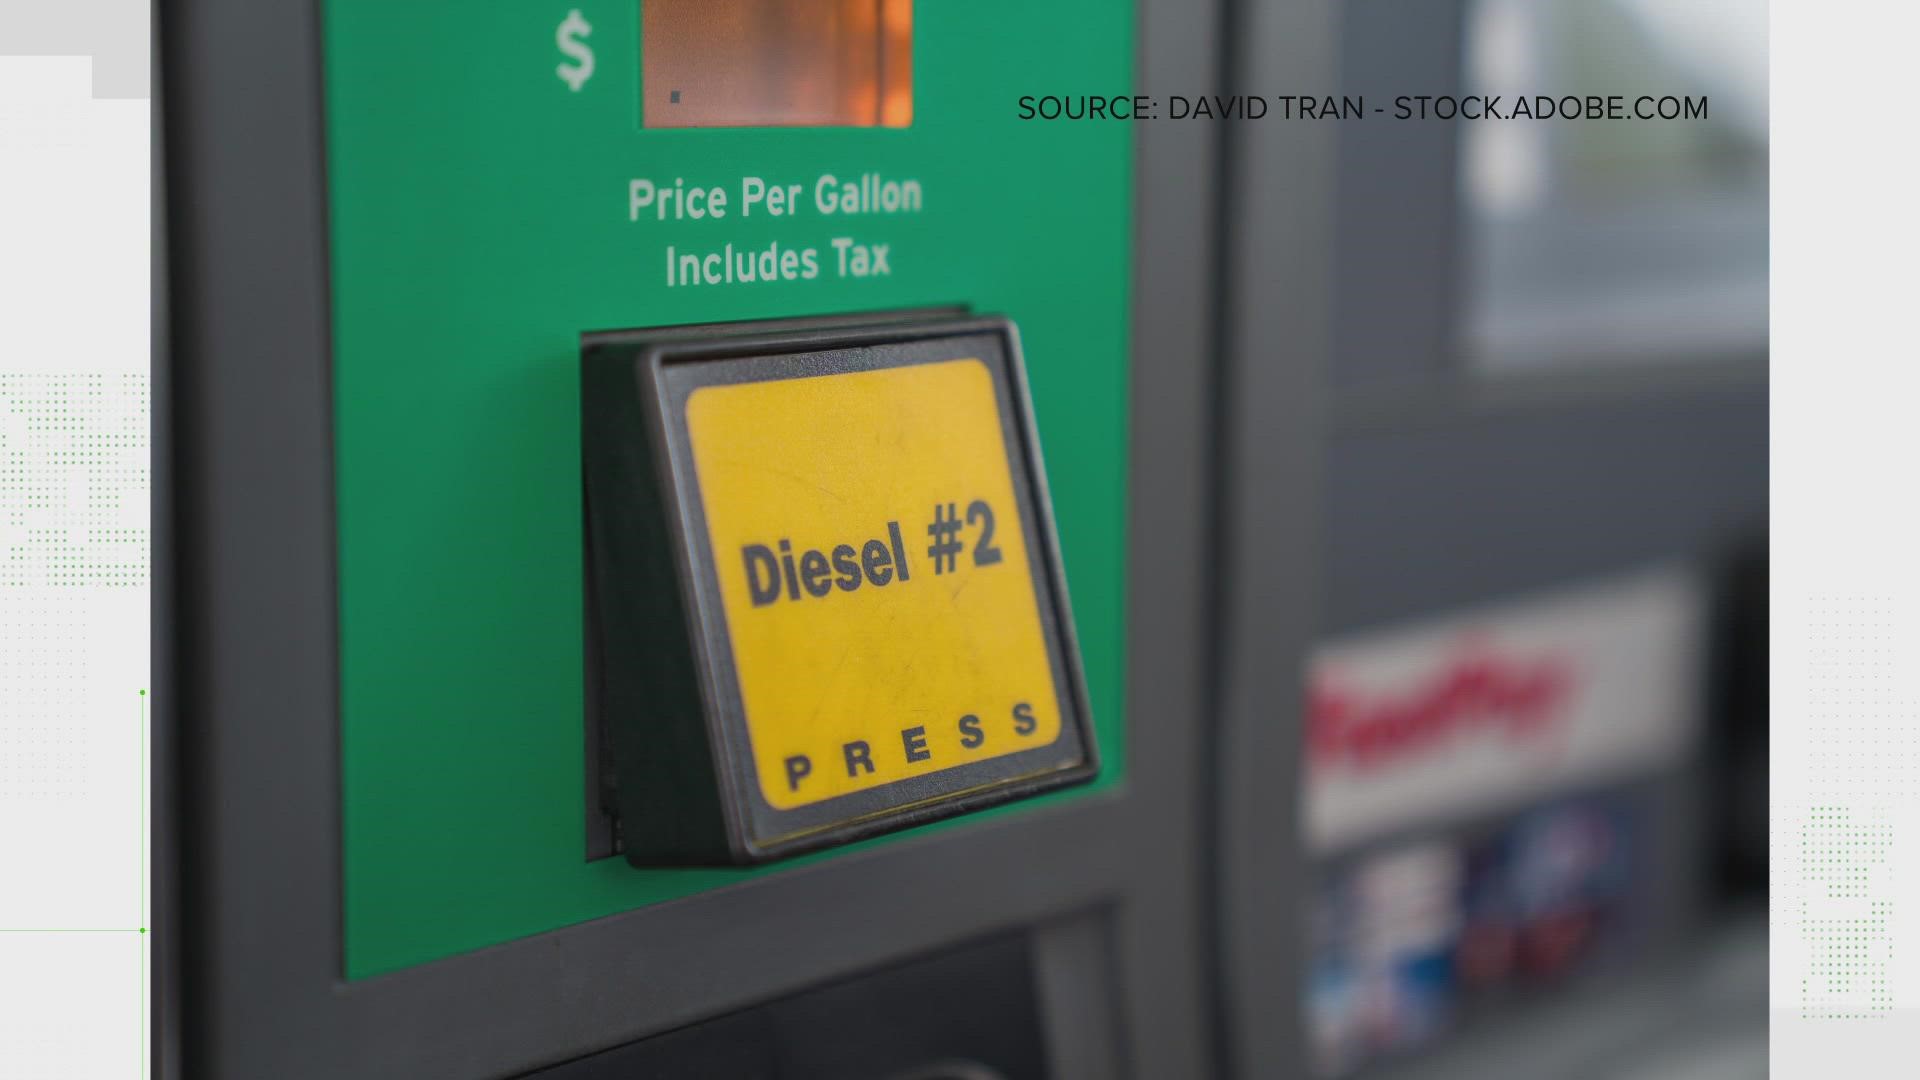 A viewer emailed the national VERIFY team asking when and why diesel fuel stopped being cheaper than regular gas.